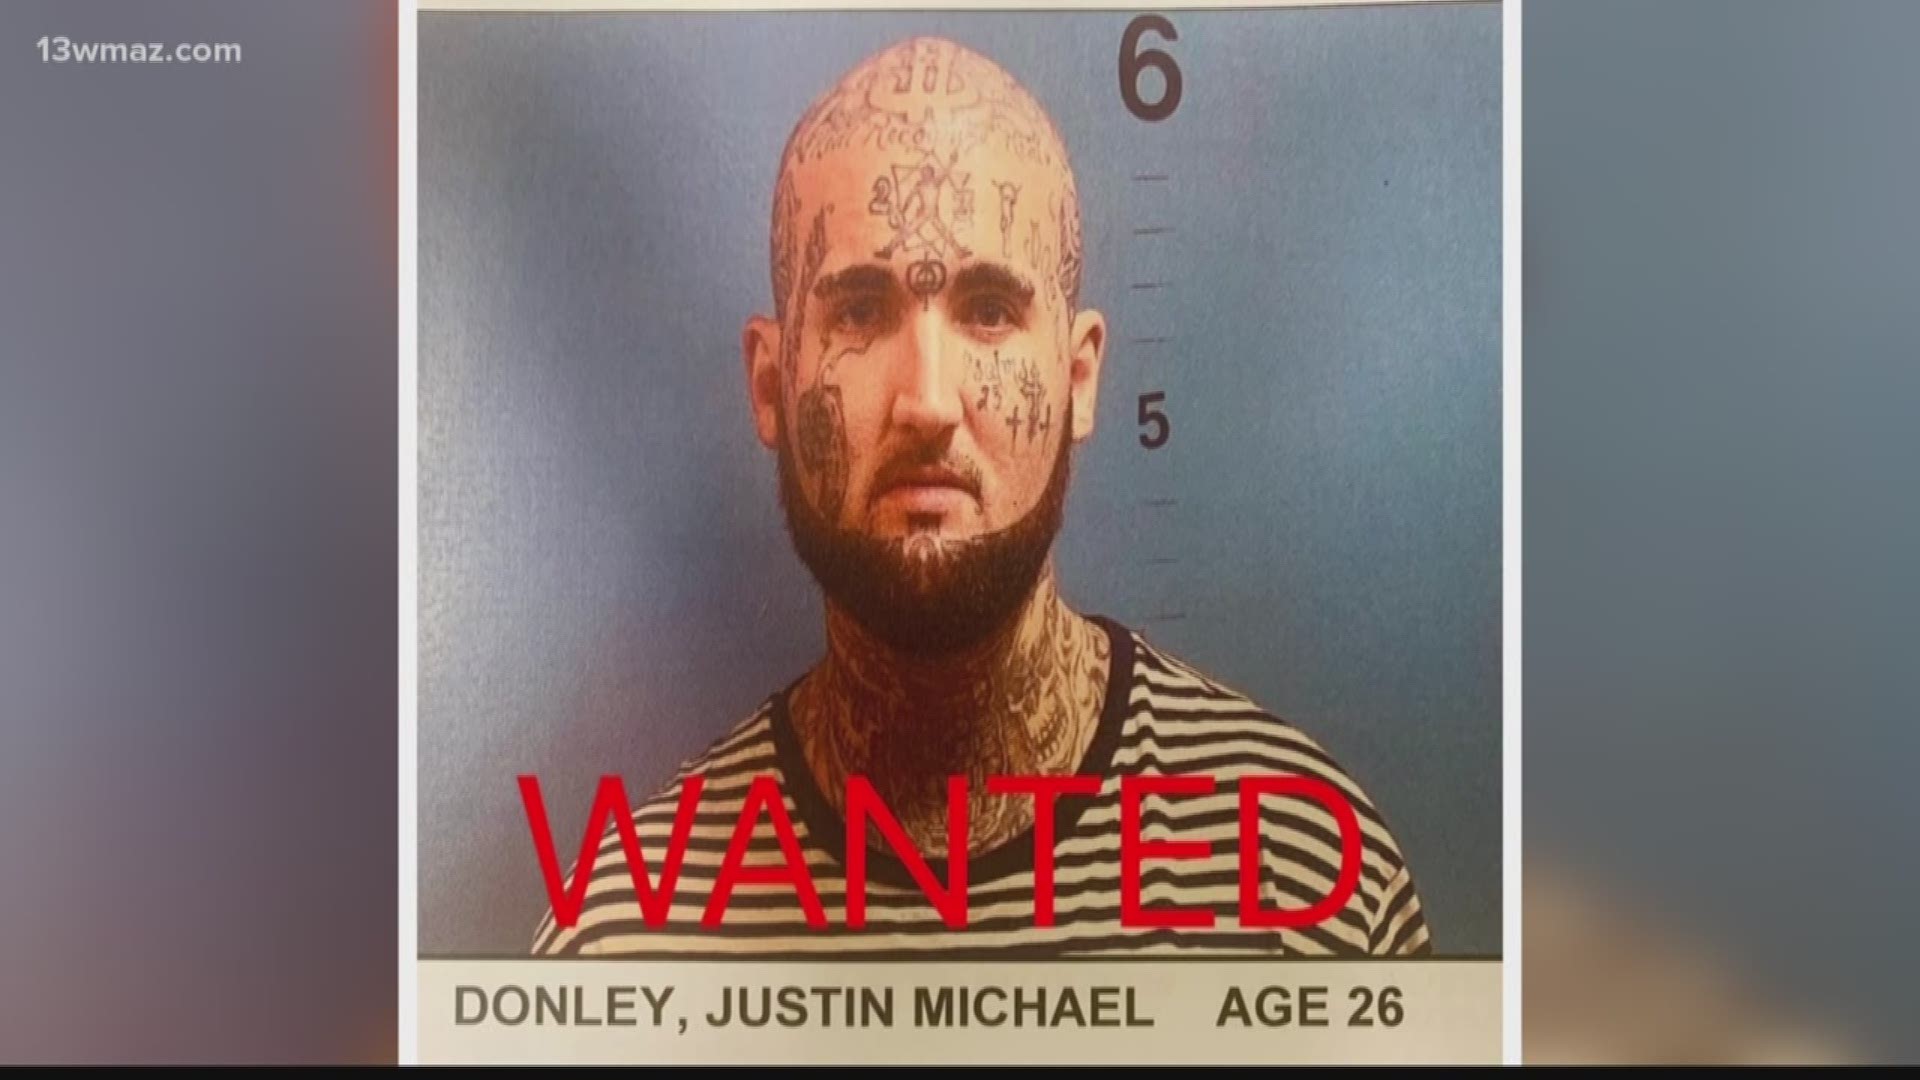 The Monroe County Sheriff's Office is still looking for 26-year-old Justin Donley who allegedly shot at a deputy during a car chase. Another suspect is in custody.